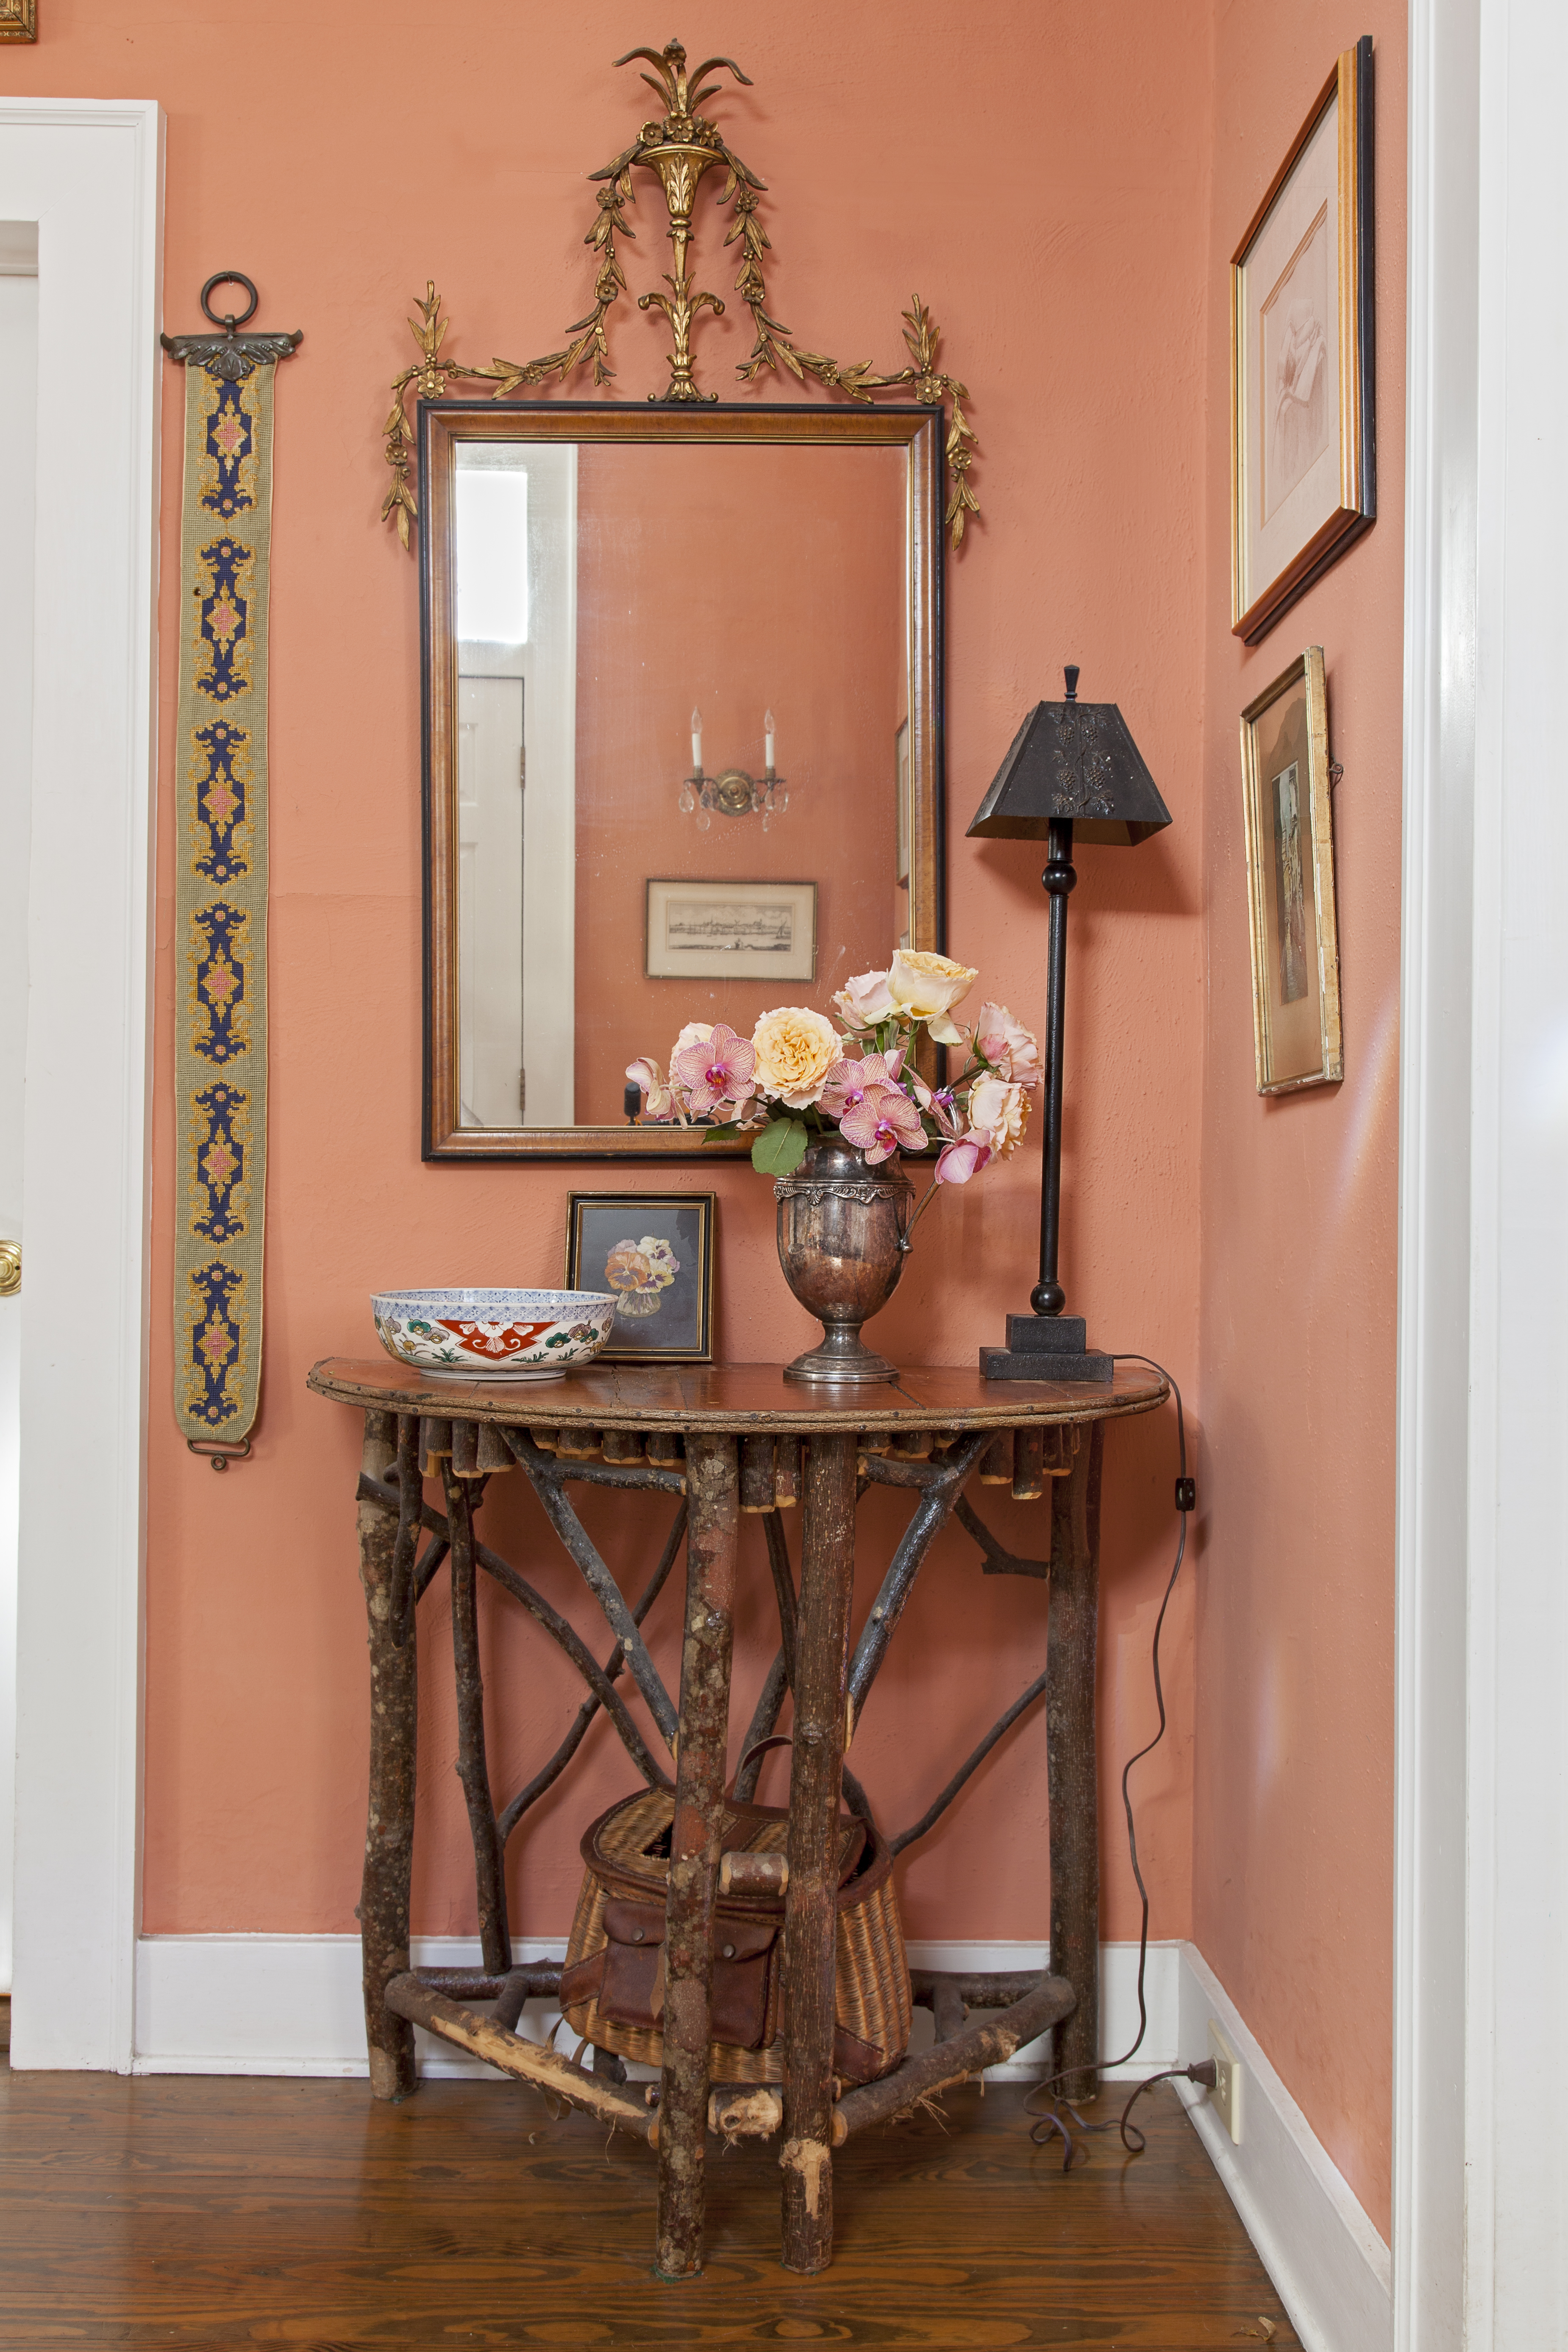 A welcoming vignette in the entry way